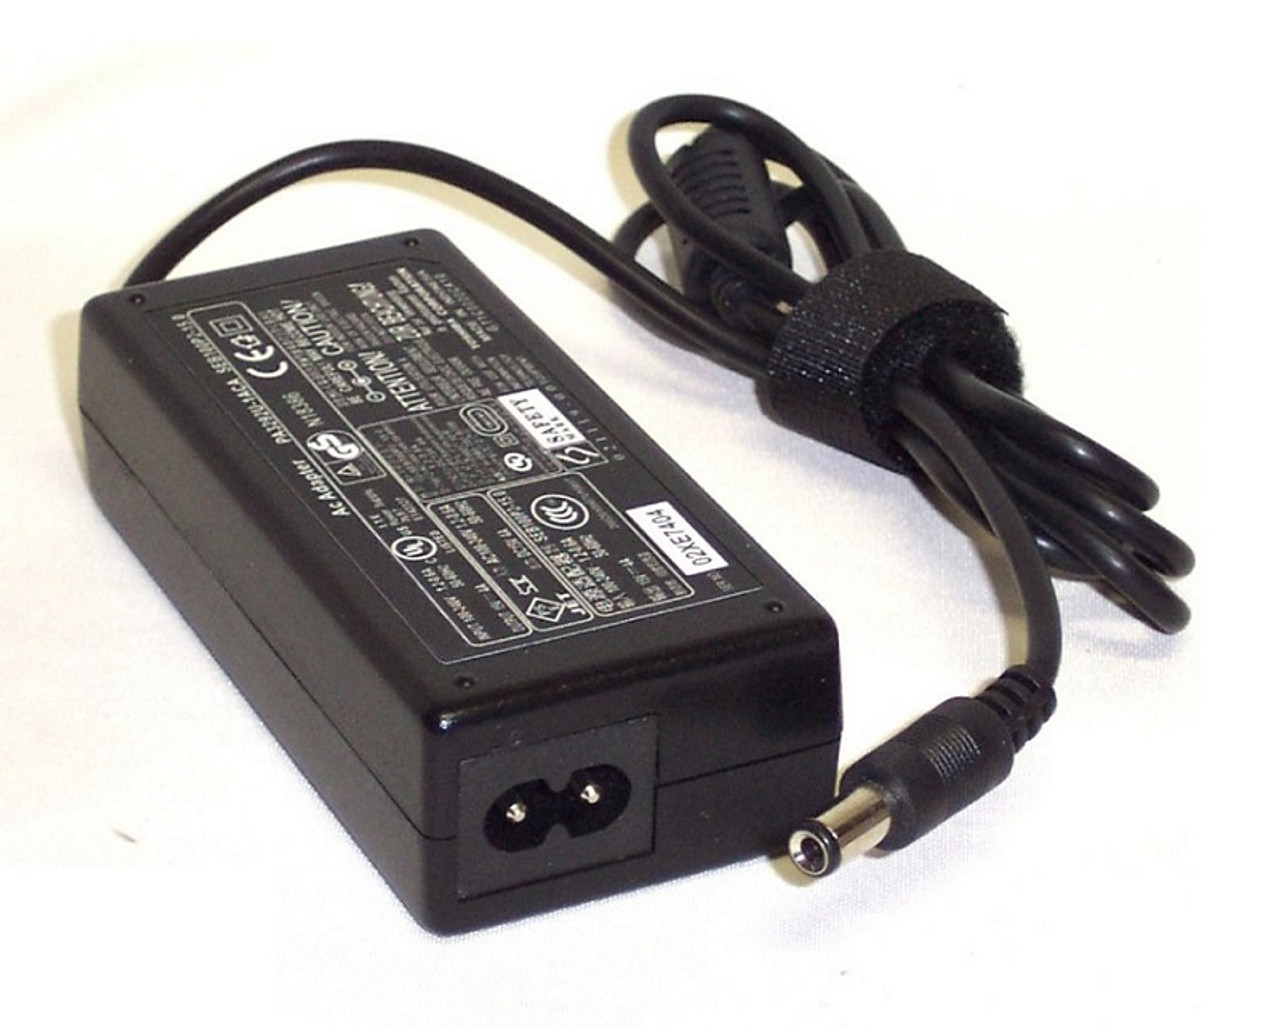 PA-1151-03 - HP 150-Watts 110-240vac Input 50/60hz 18.9V DC AC Adapter for Elite Book